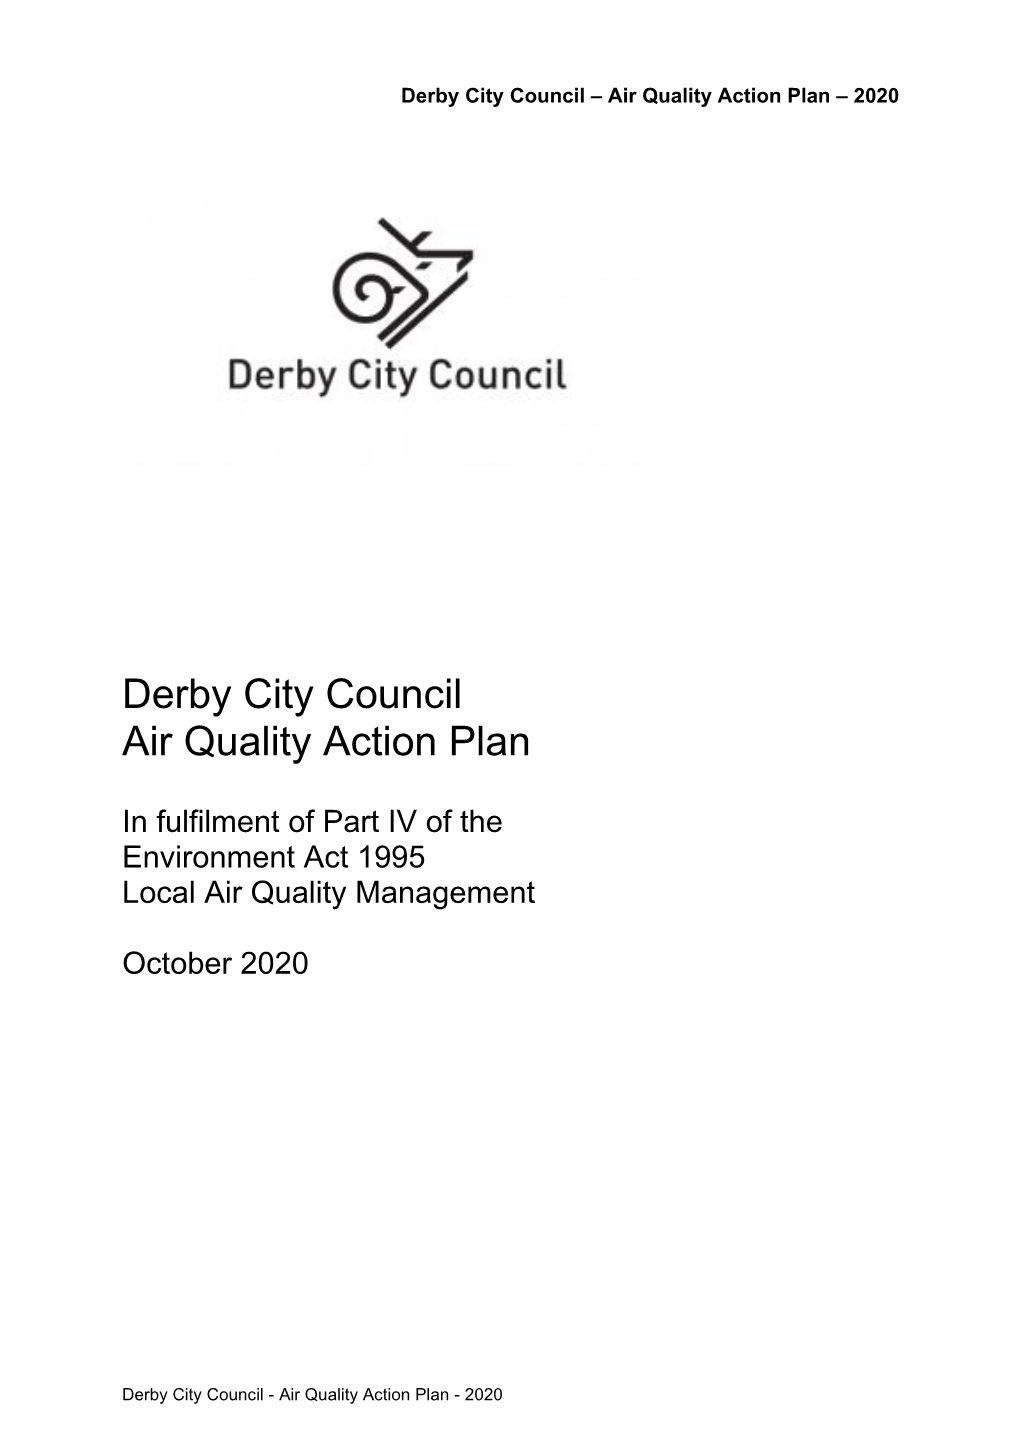 Derby City Council Air Quality Action Plan